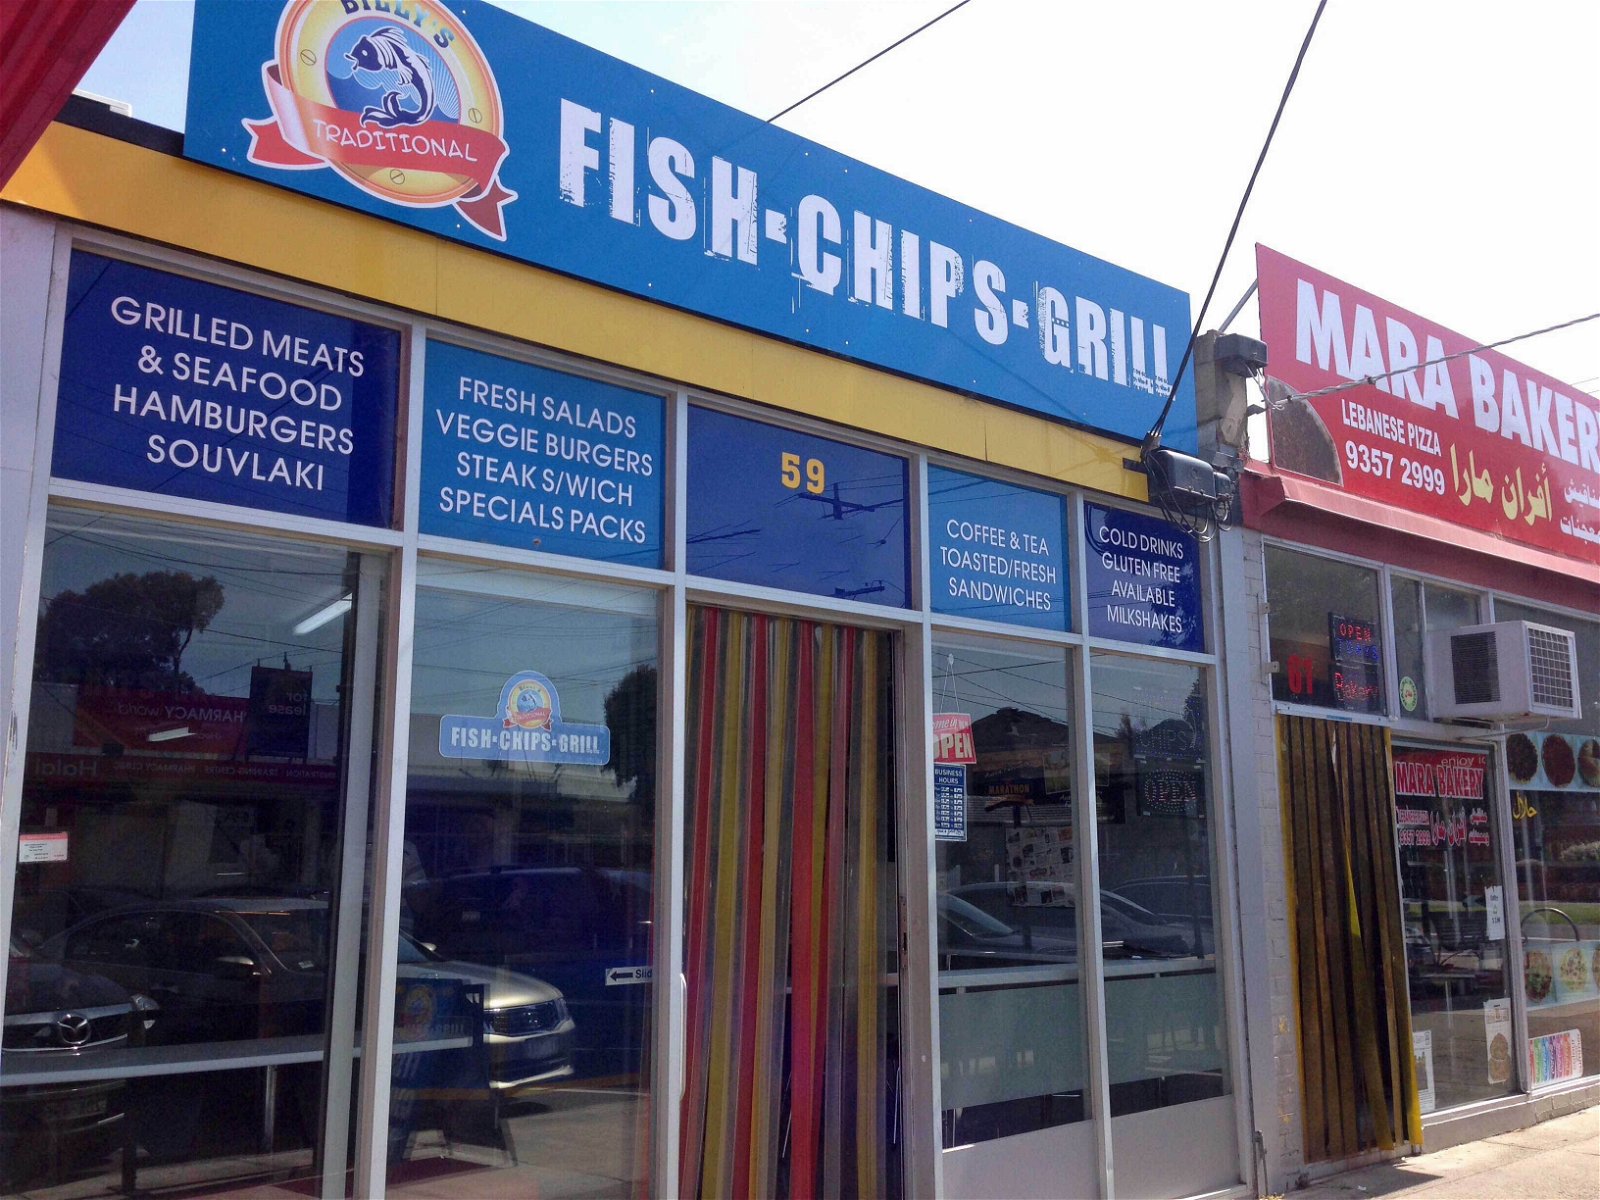 Billy's Traditional Fish Chips Grill